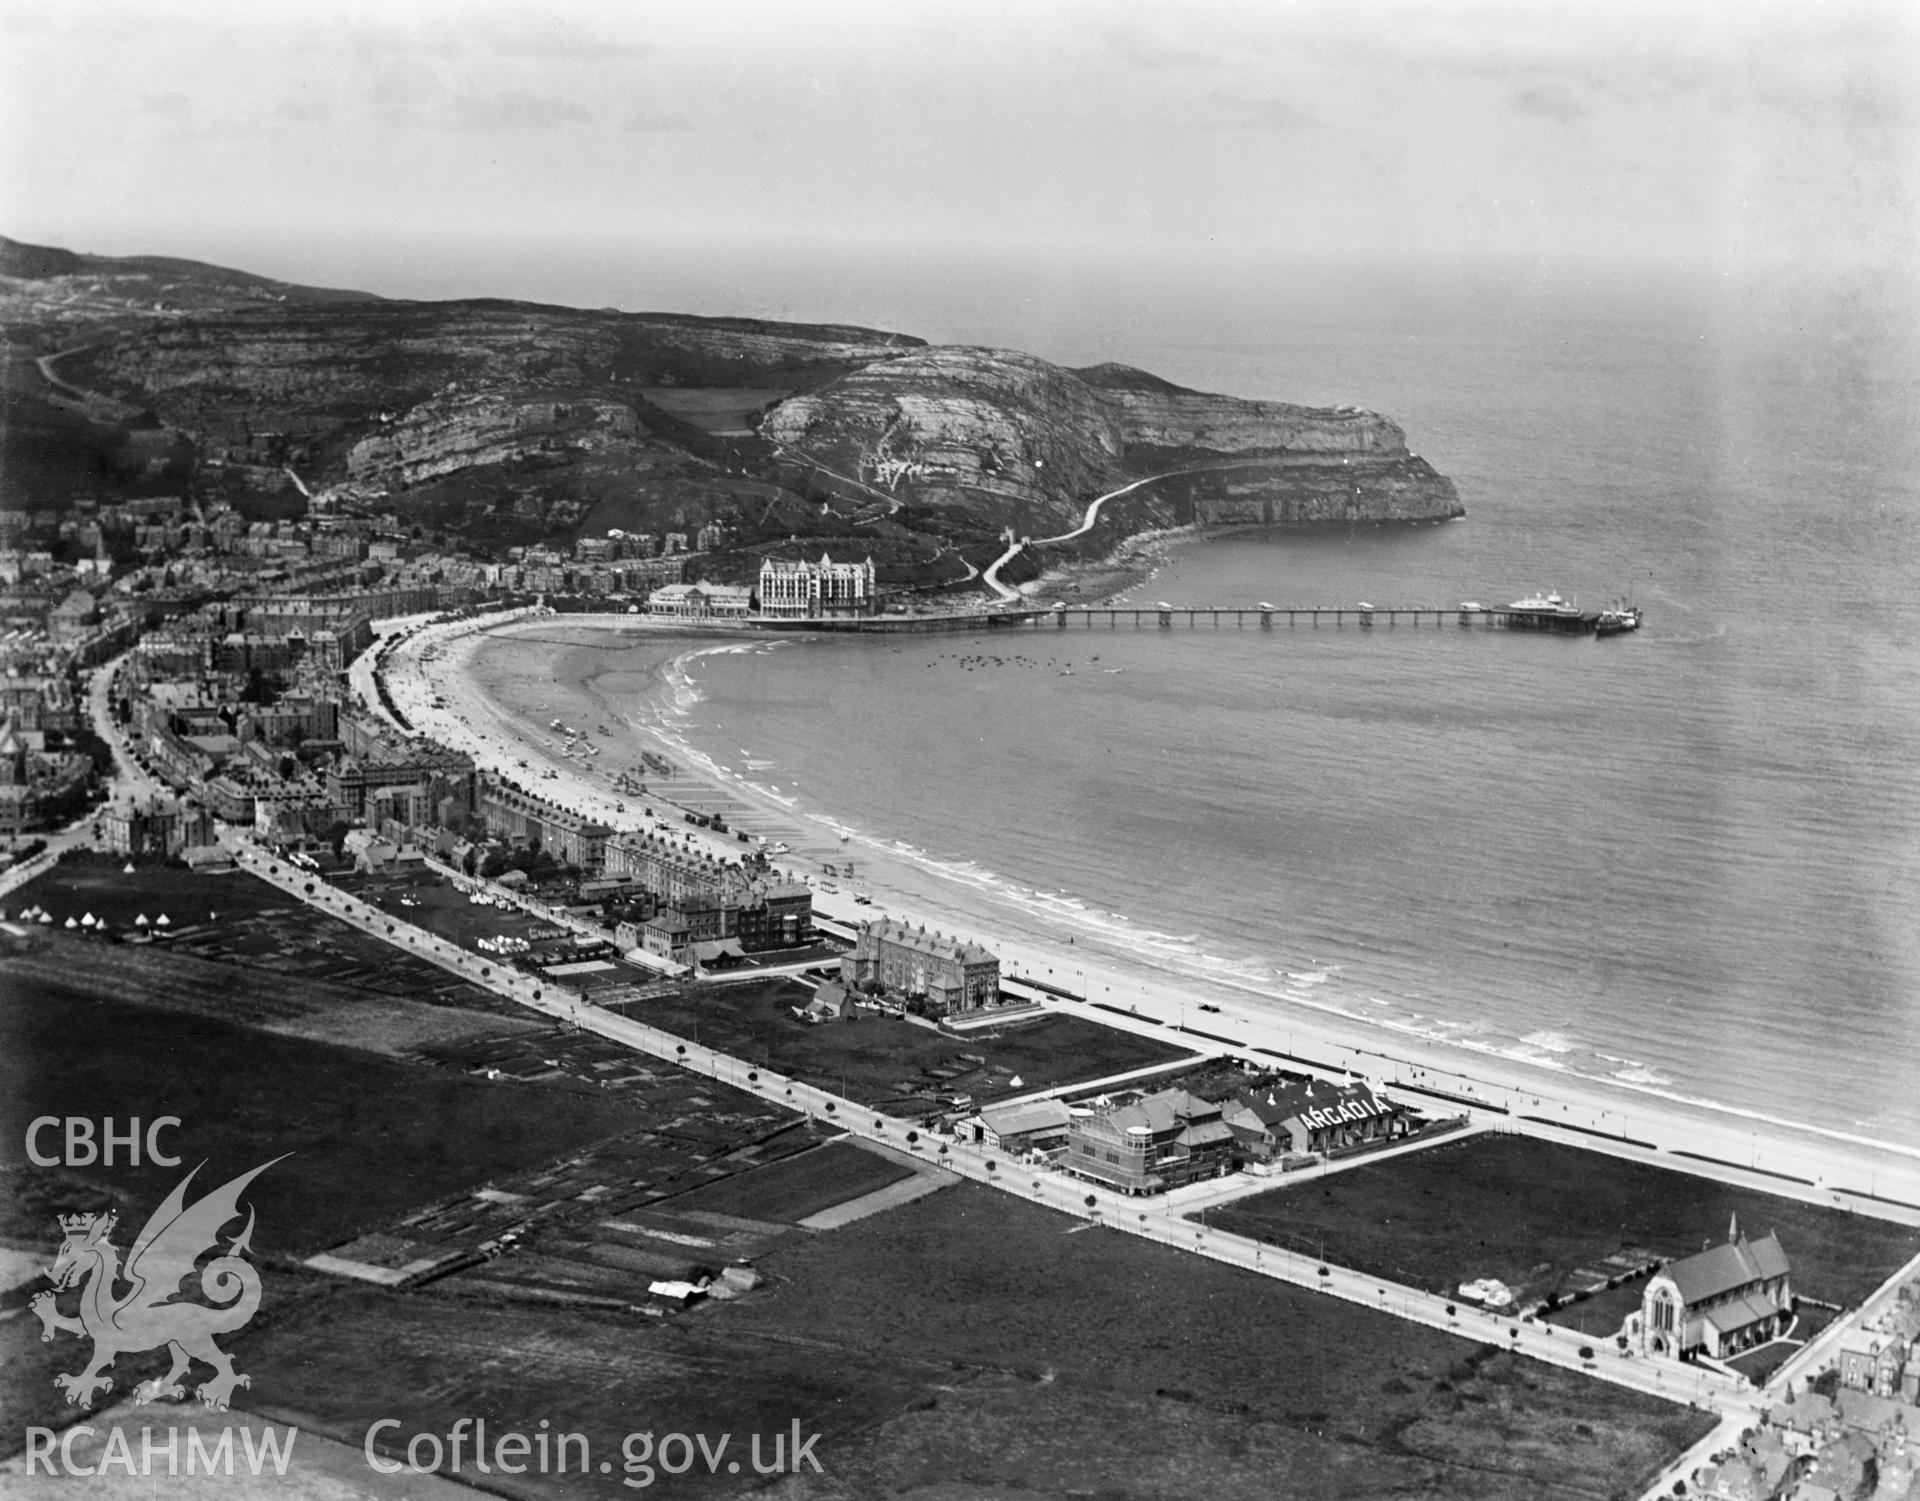 View of Llandudno showing Arcadia theatre, oblique aerial view. 5?x4? black and white glass plate negative.